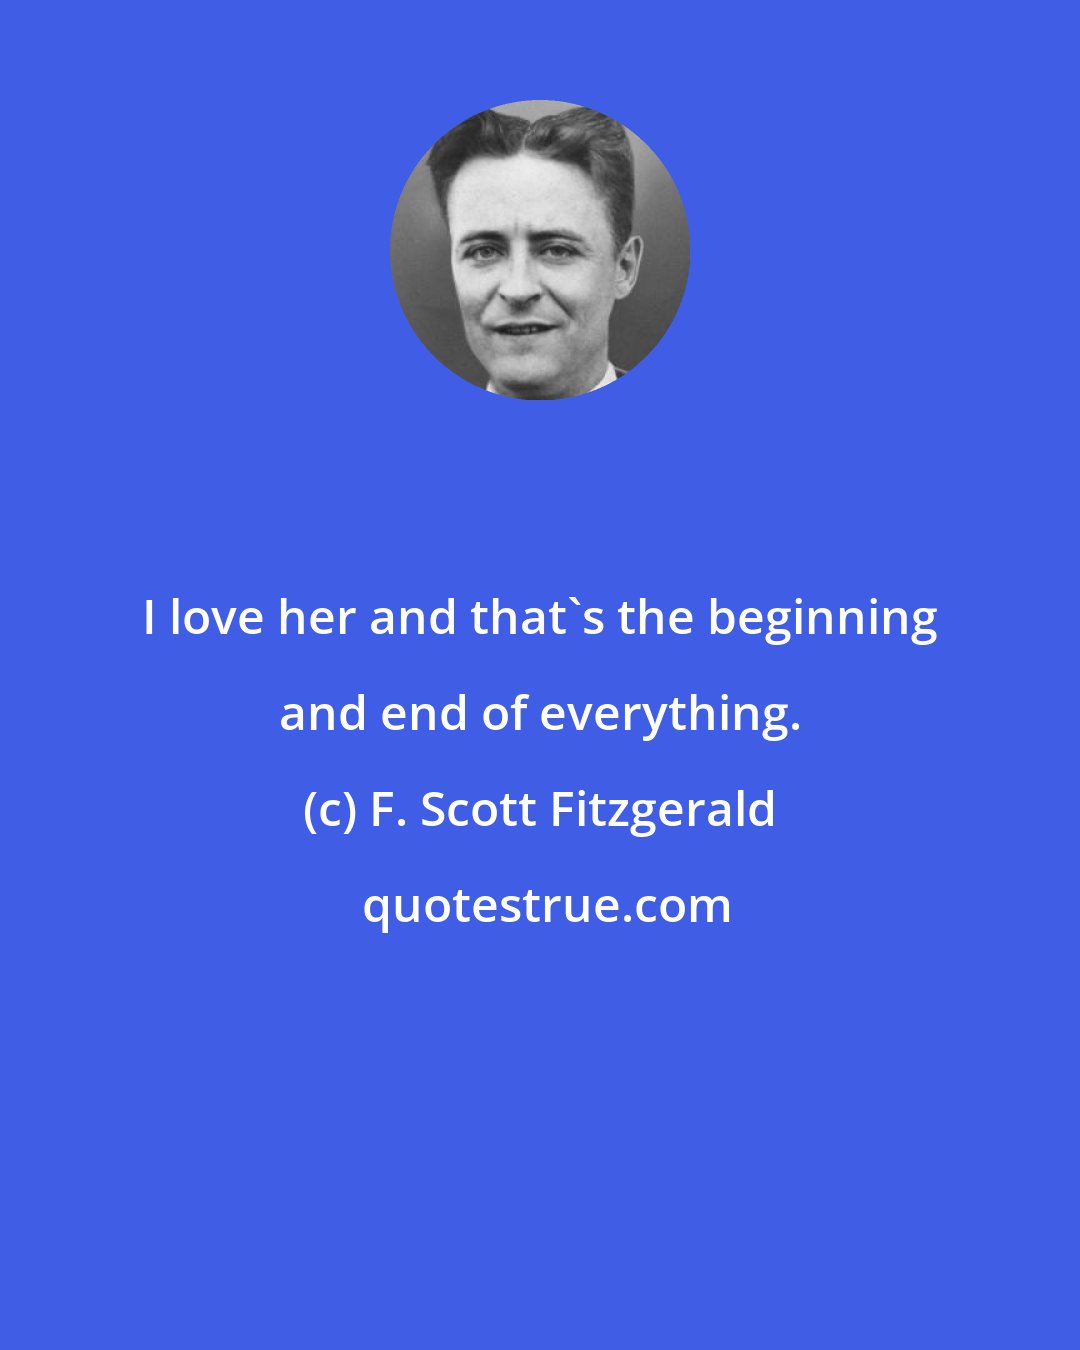 F. Scott Fitzgerald: I love her and that's the beginning and end of everything.